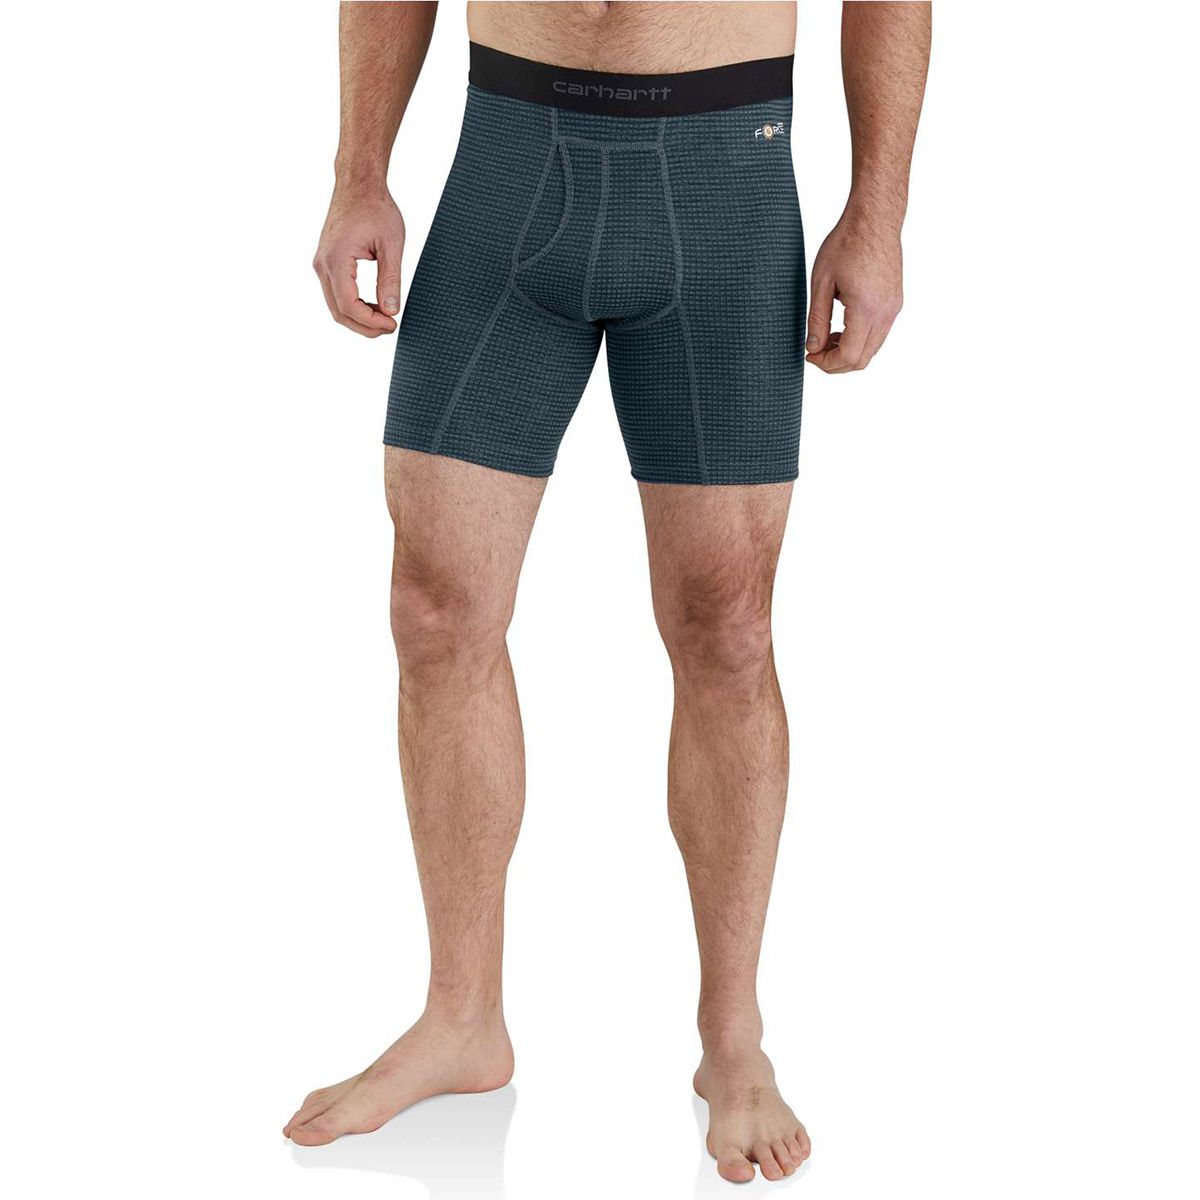 HANES Men's X-Temp Cotton Boxer Briefs Assorted, 4-Pack - Eastern Mountain  Sports